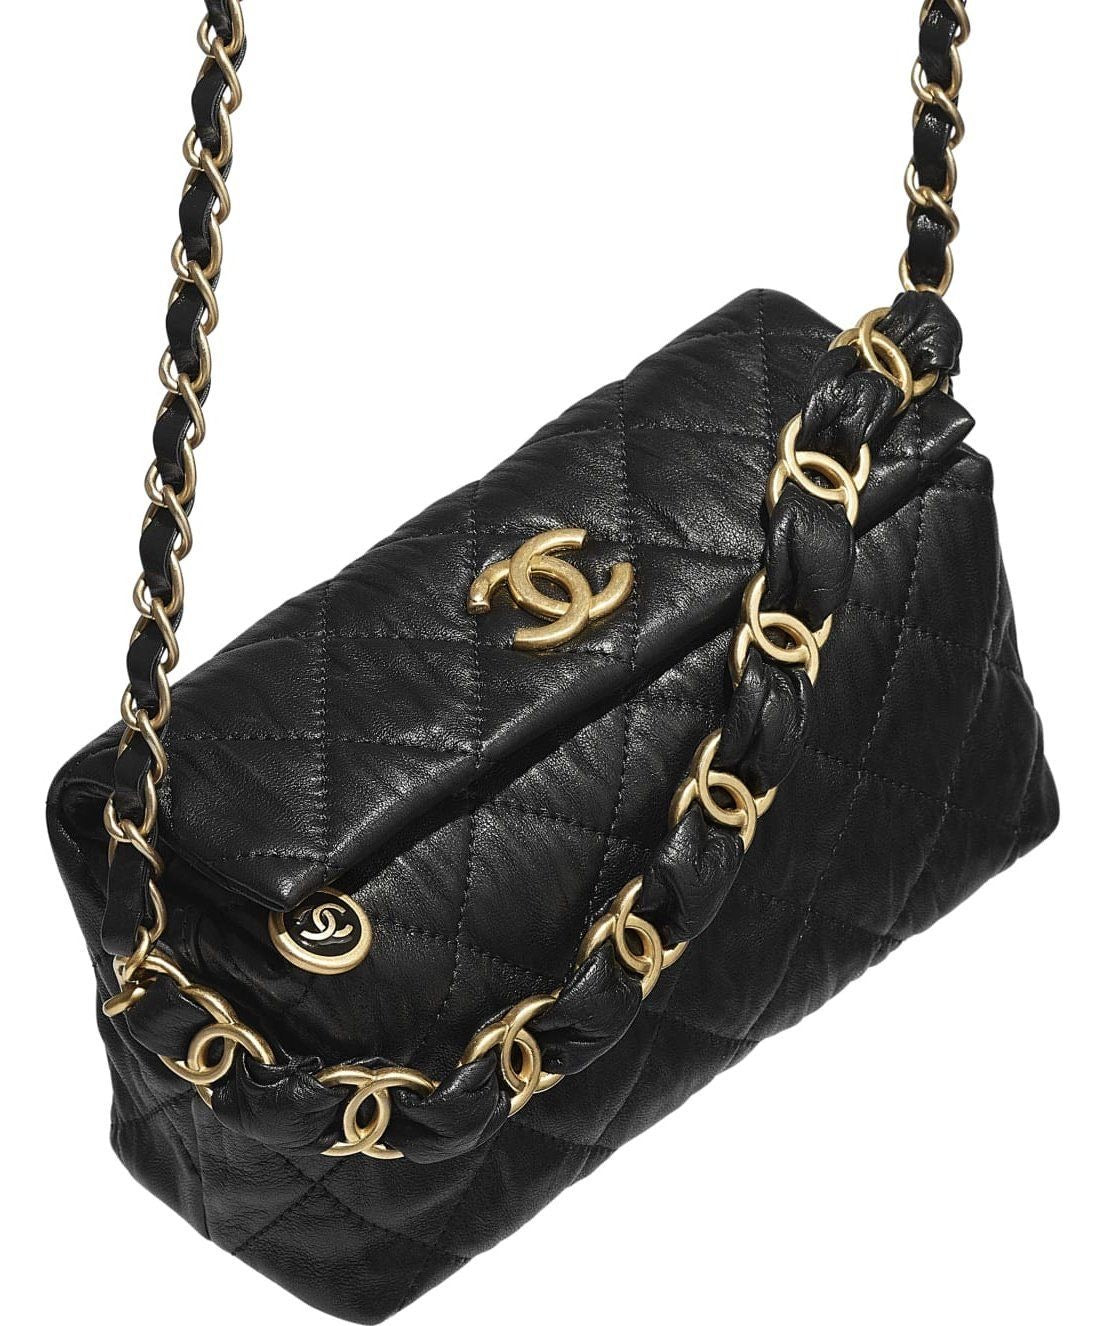 Chanel 23C Shiny Crumpled Calfskin Small Hobo Bag with Antique